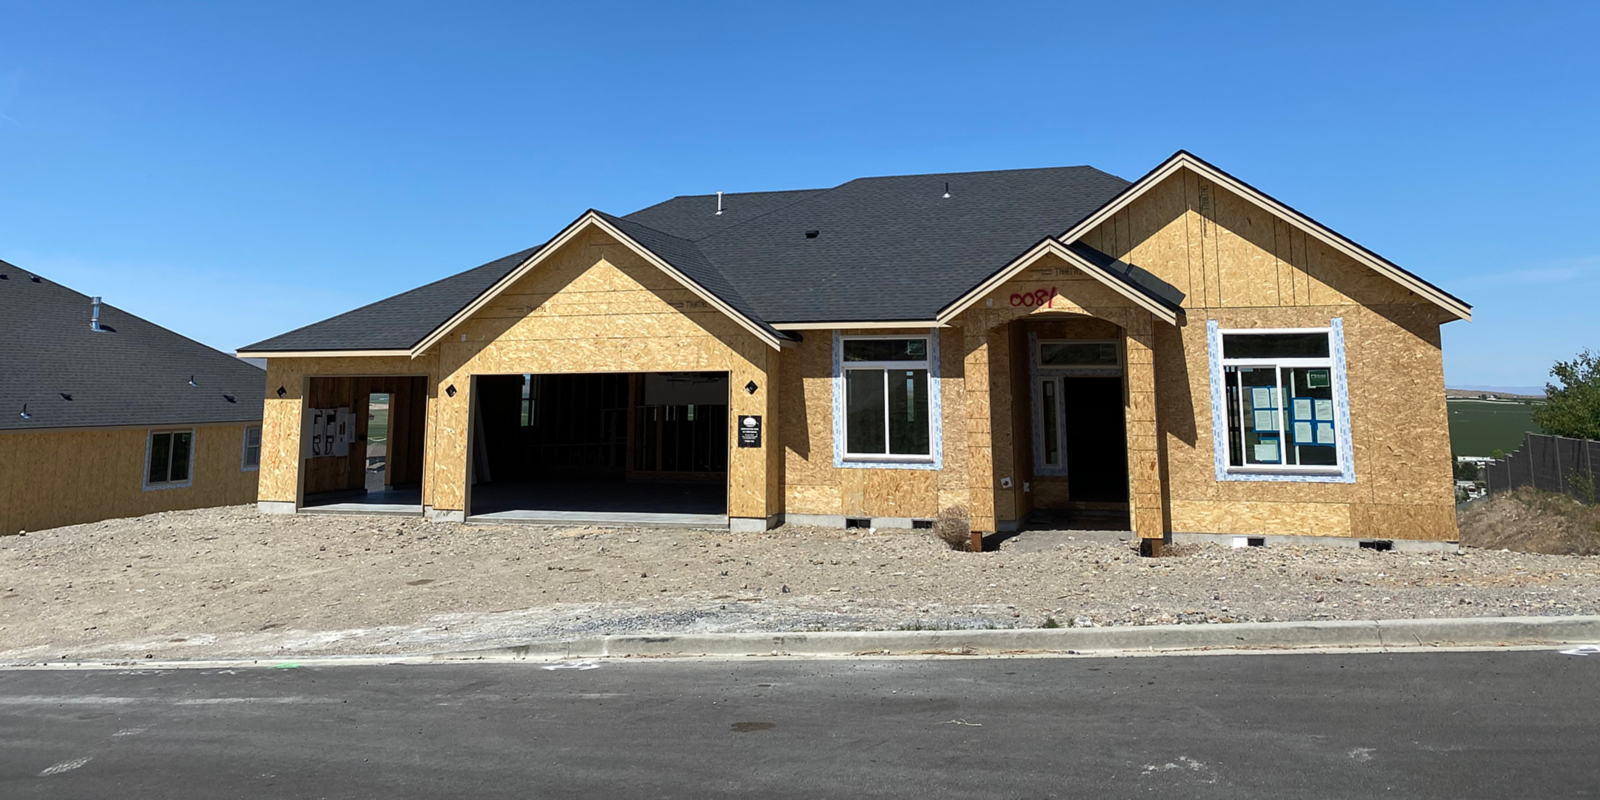 2 Things to Know if You’re Thinking About Building a Home in the Tri-Cities